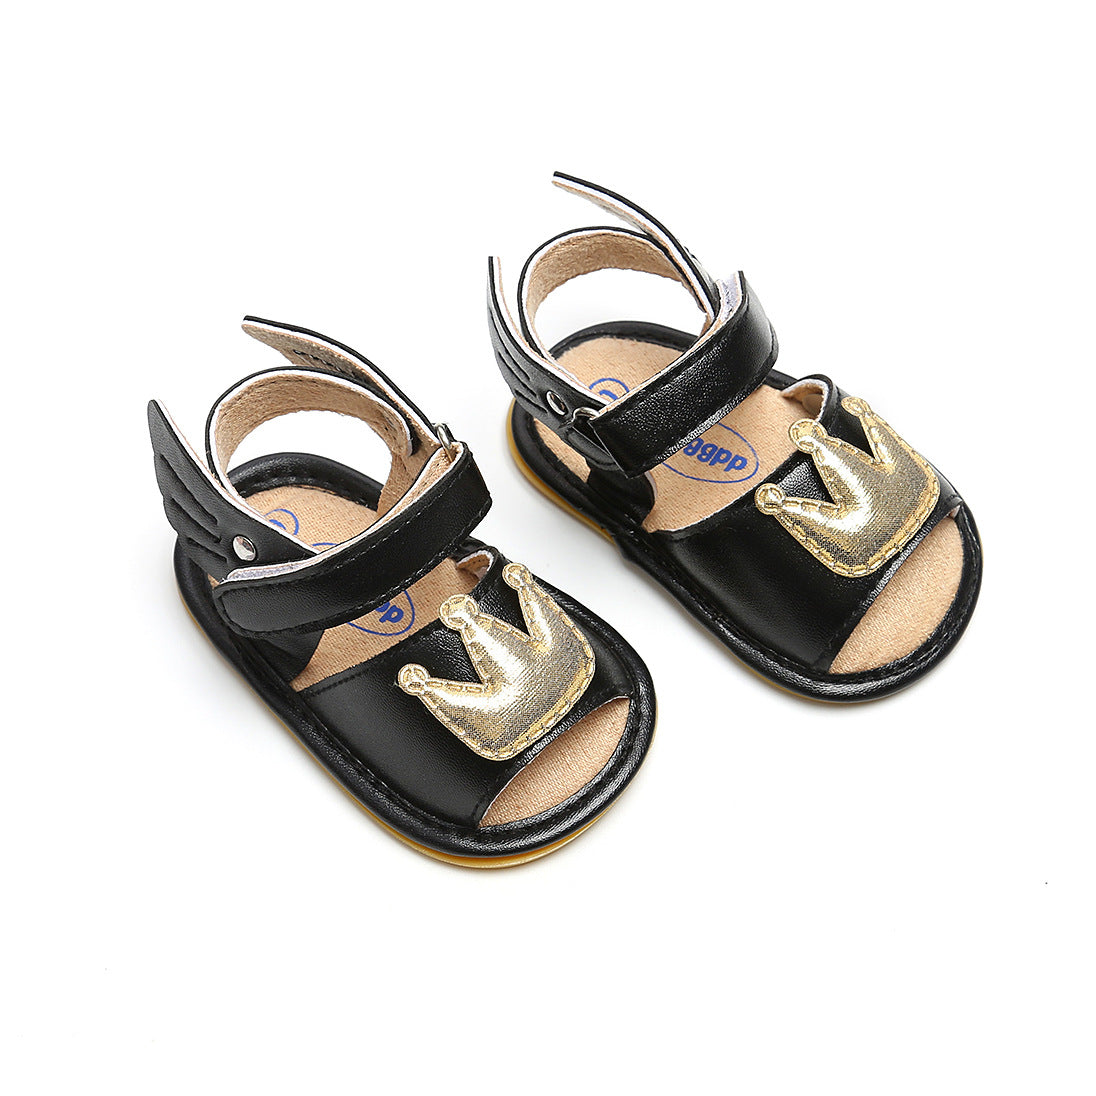 Spring And Summer 0-1 Year Old Baby Shoes Baby Sandals Baby Shoes Toddler Shoes